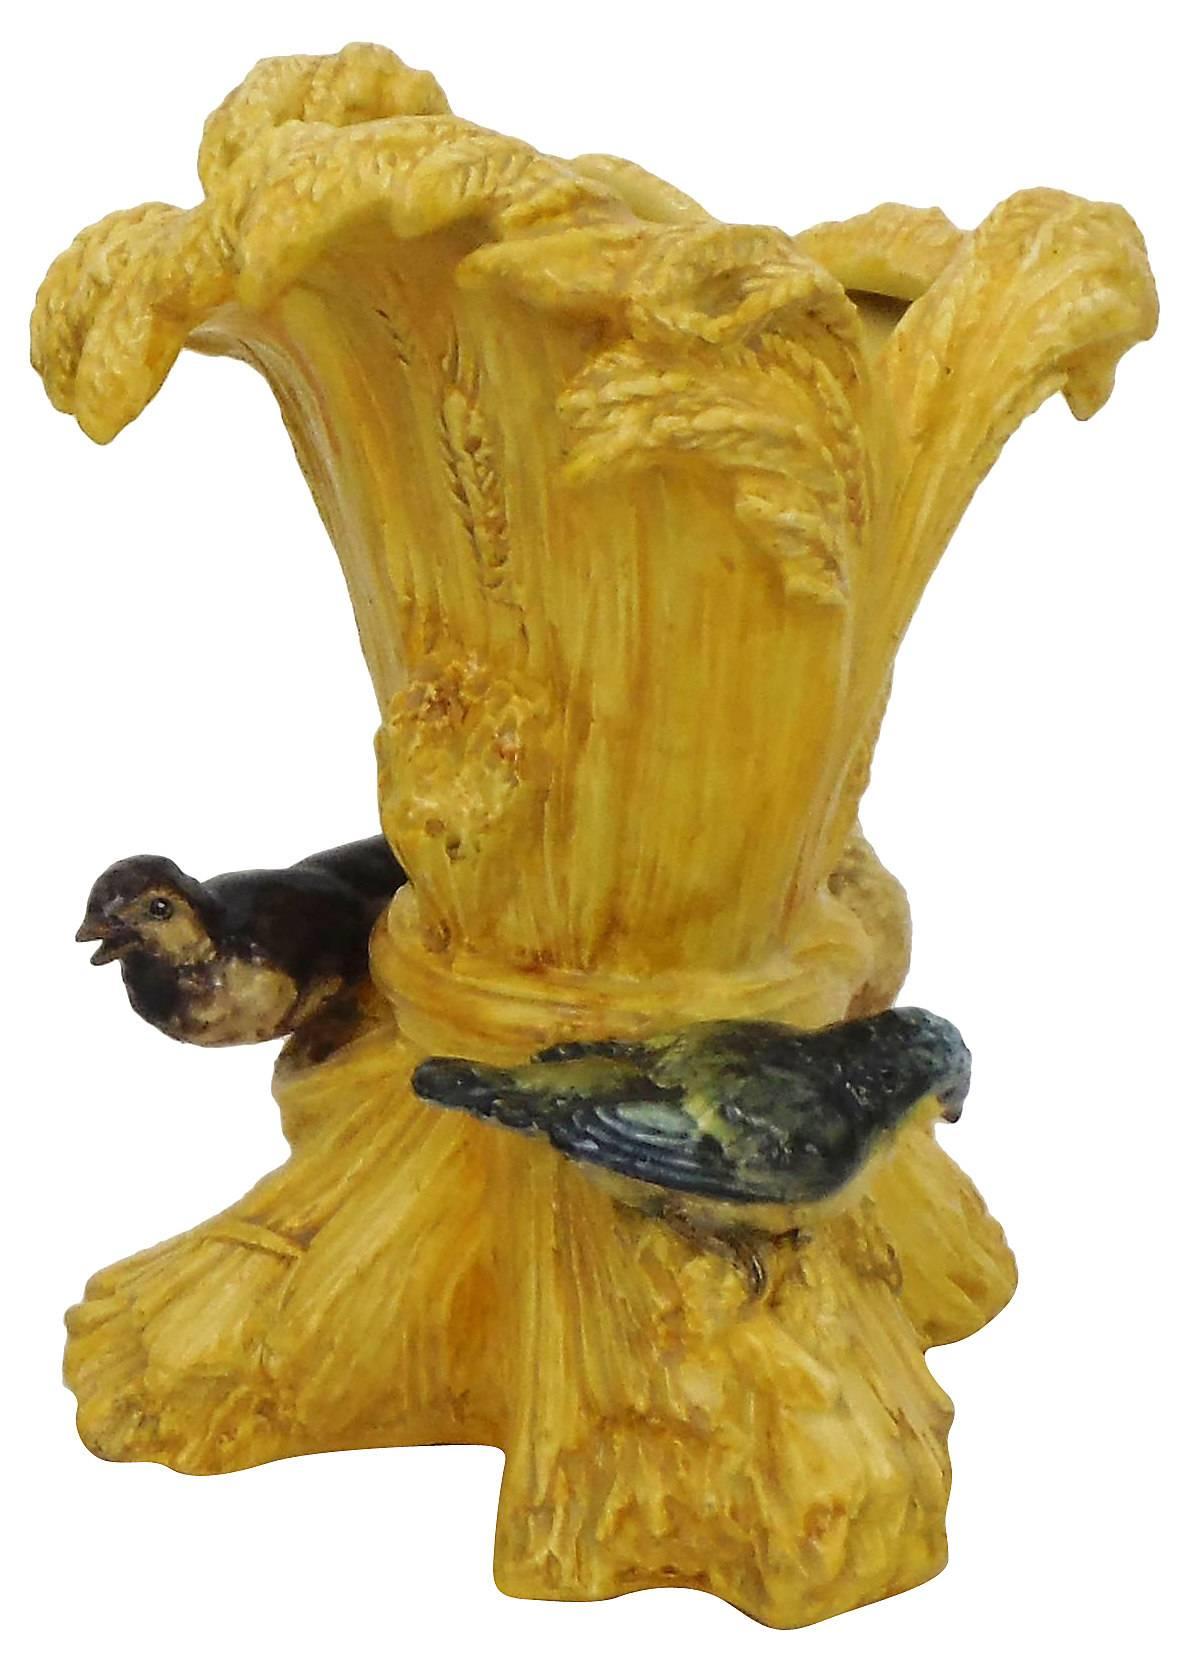 19th century large Majolica sheaf of wheat vase with birds around the vase signed Delphin Massier.
The Massier are known for the quality of their unique enamels and paintings. The Massier family produced different pieces with birds in a very